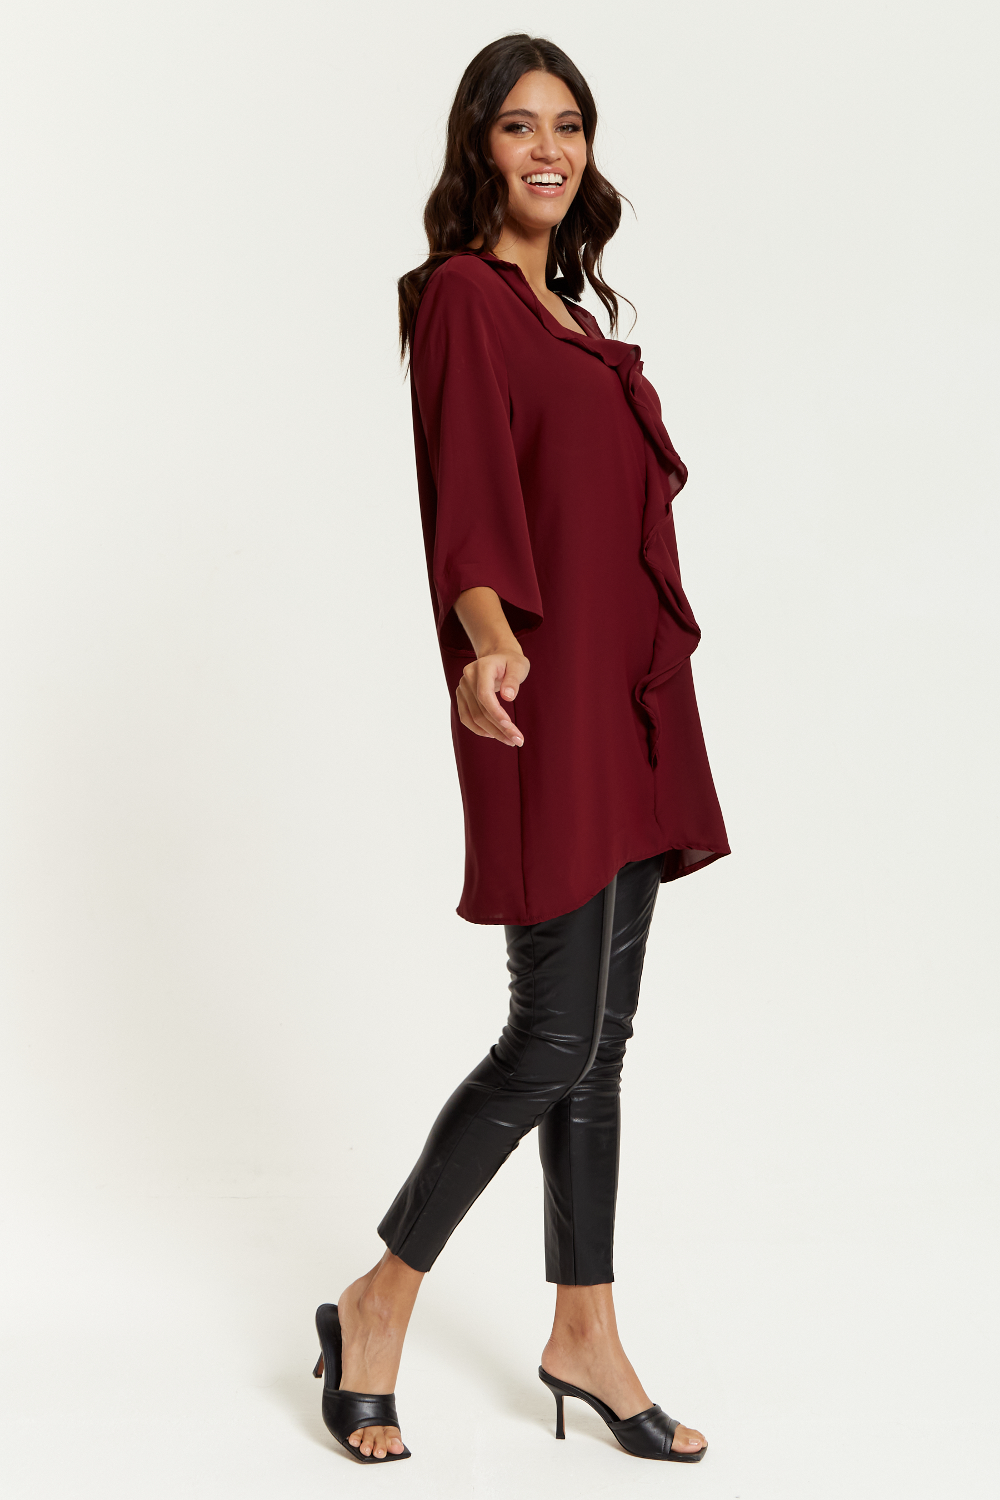 Oversized Frill Detailed 3/4 Sleeves Tunic Shirt in Burgundy GLR FASHION NETWORKING